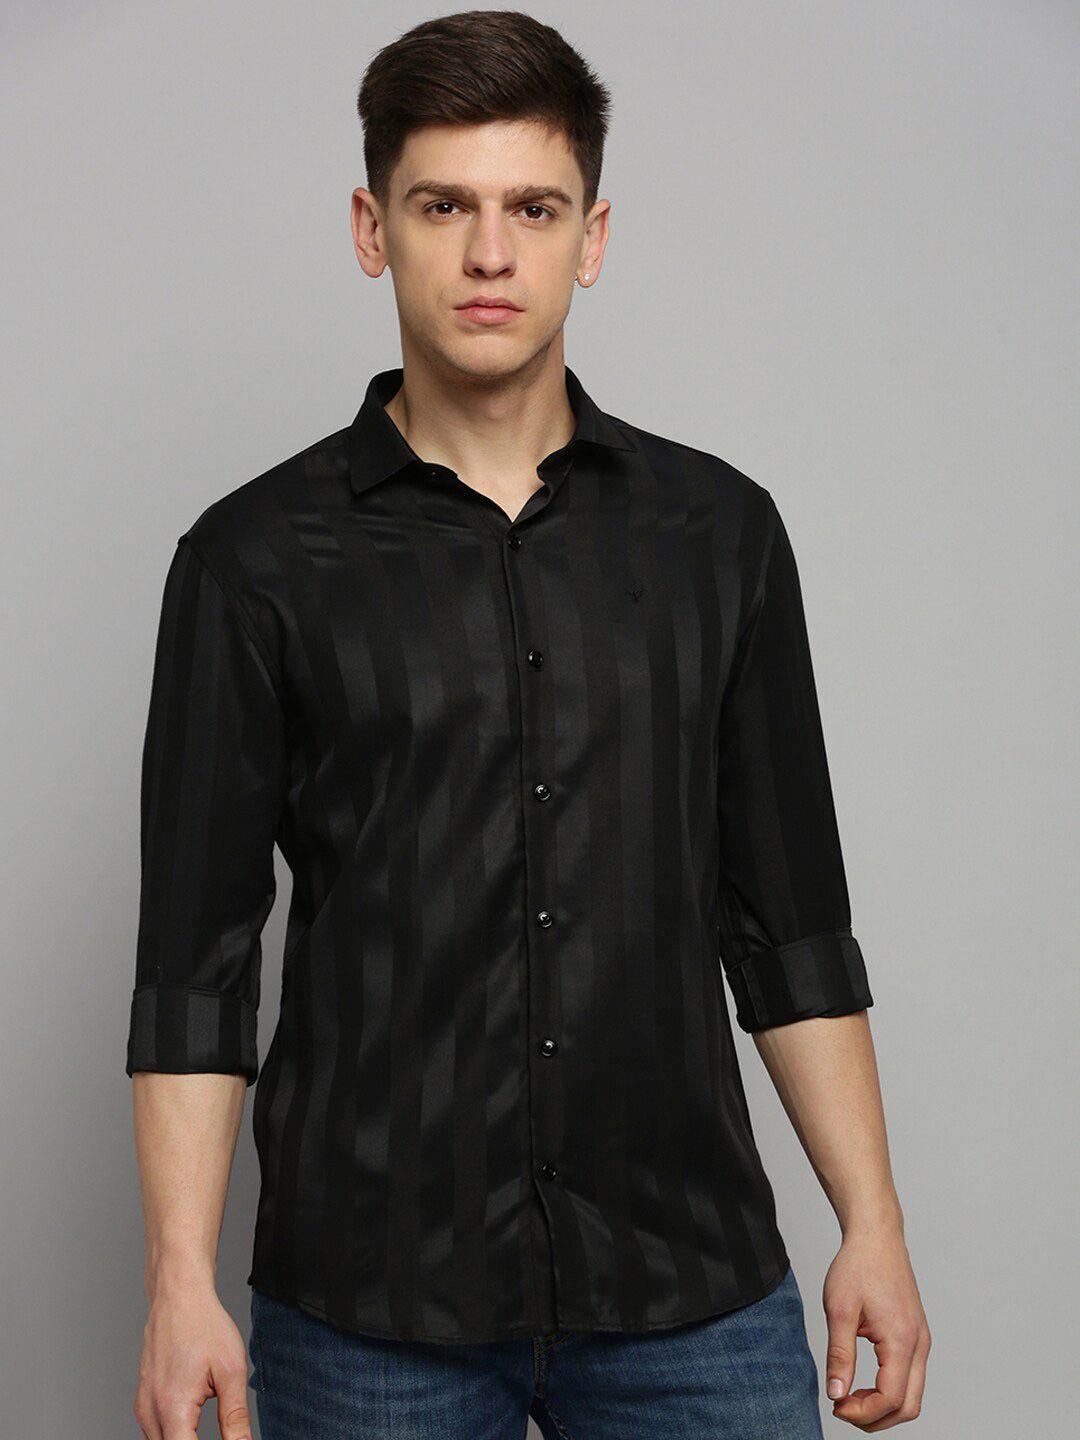 showoff classic striped spread collar casual shirt